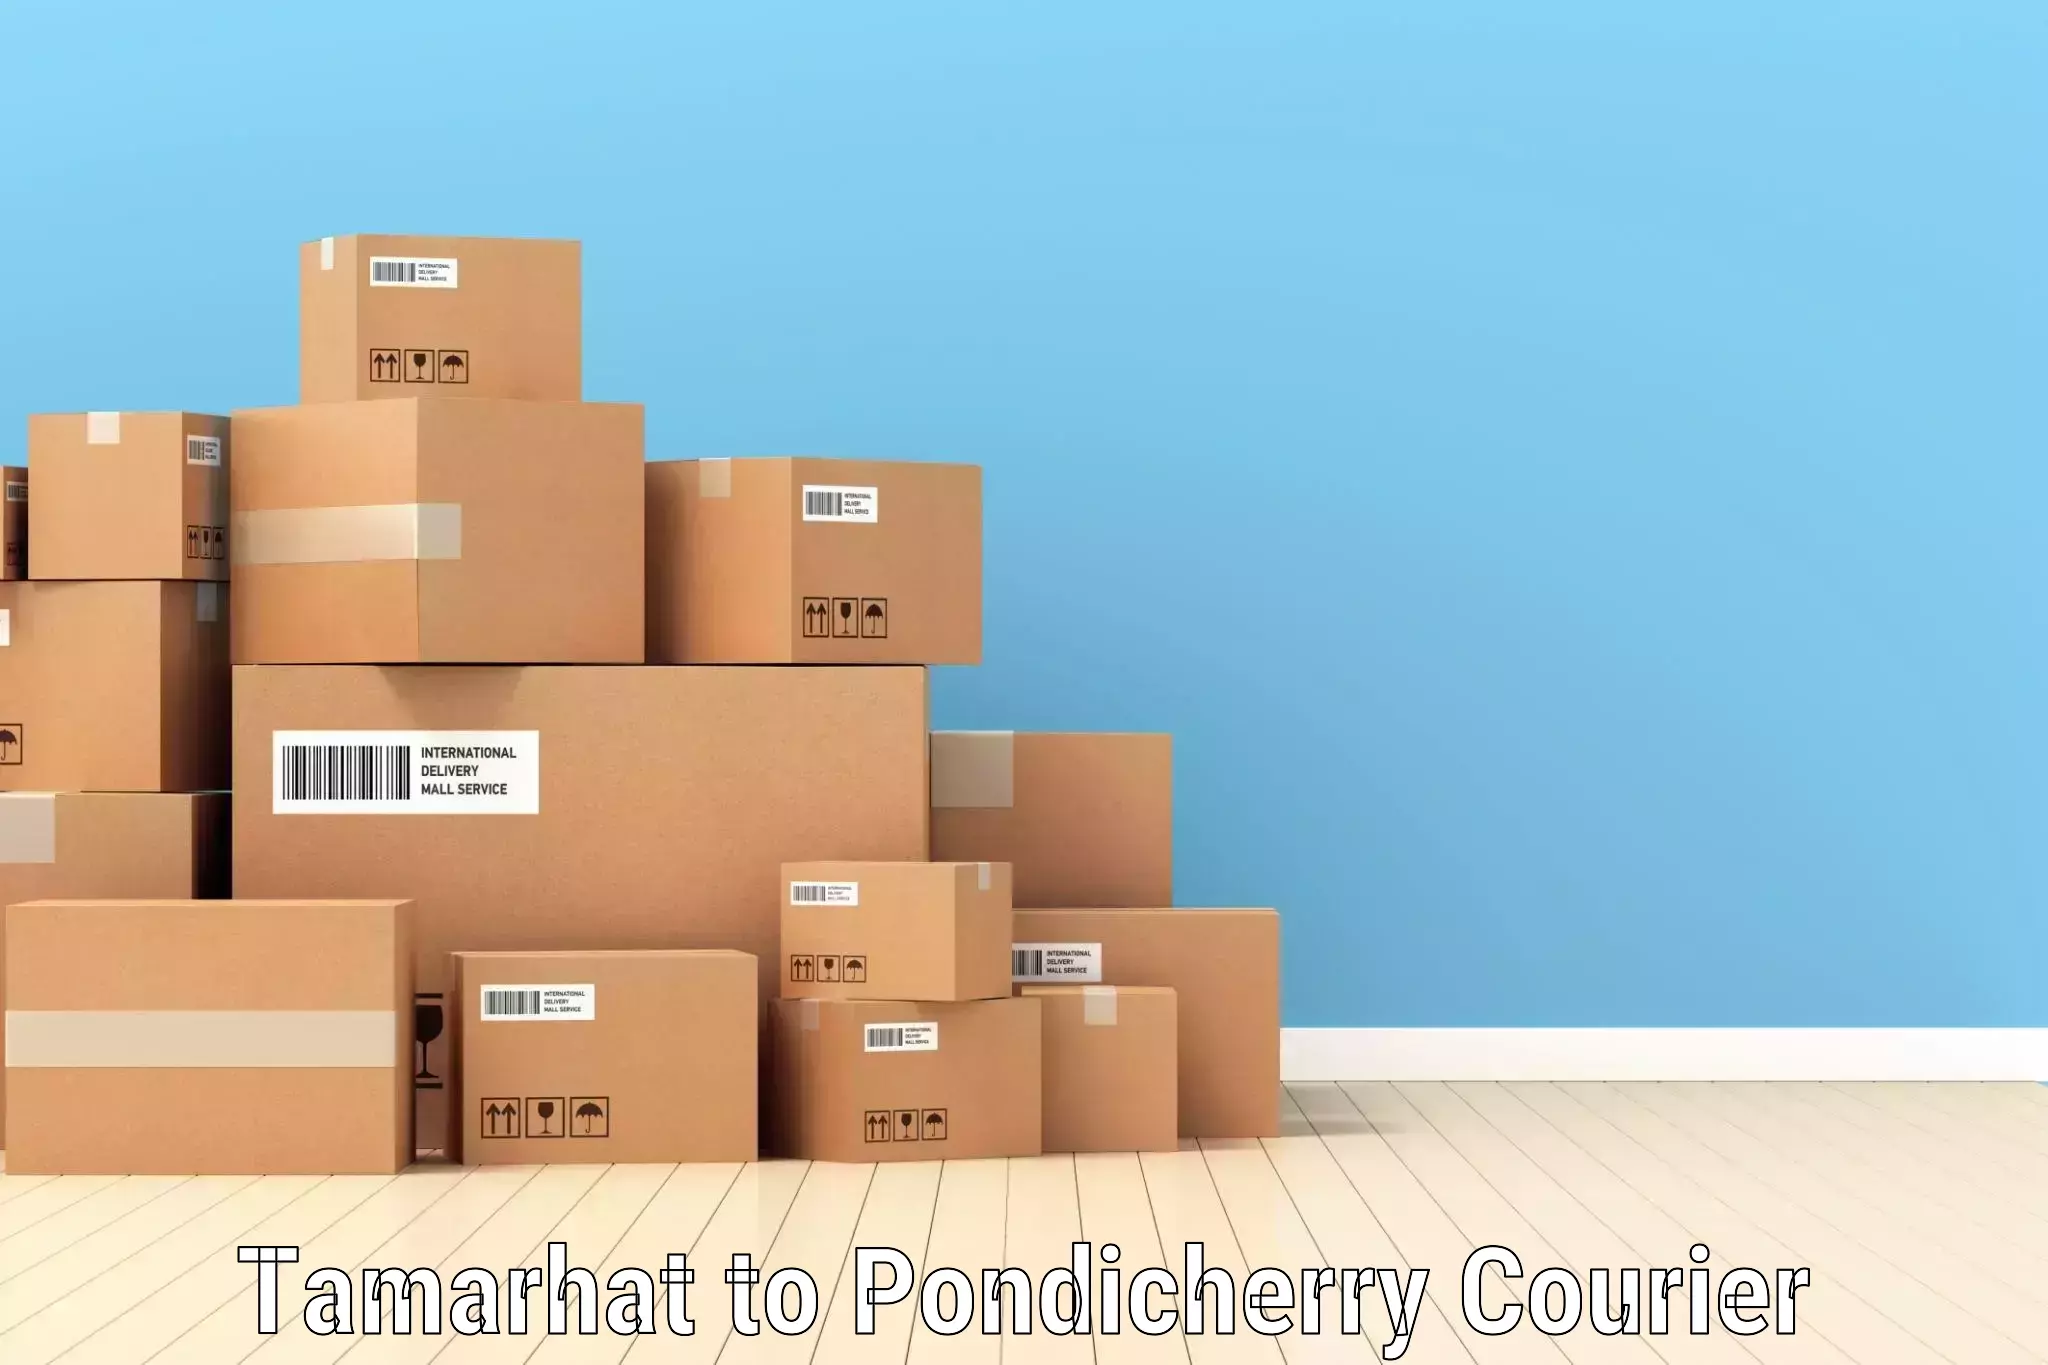 Comprehensive shipping services Tamarhat to Pondicherry University